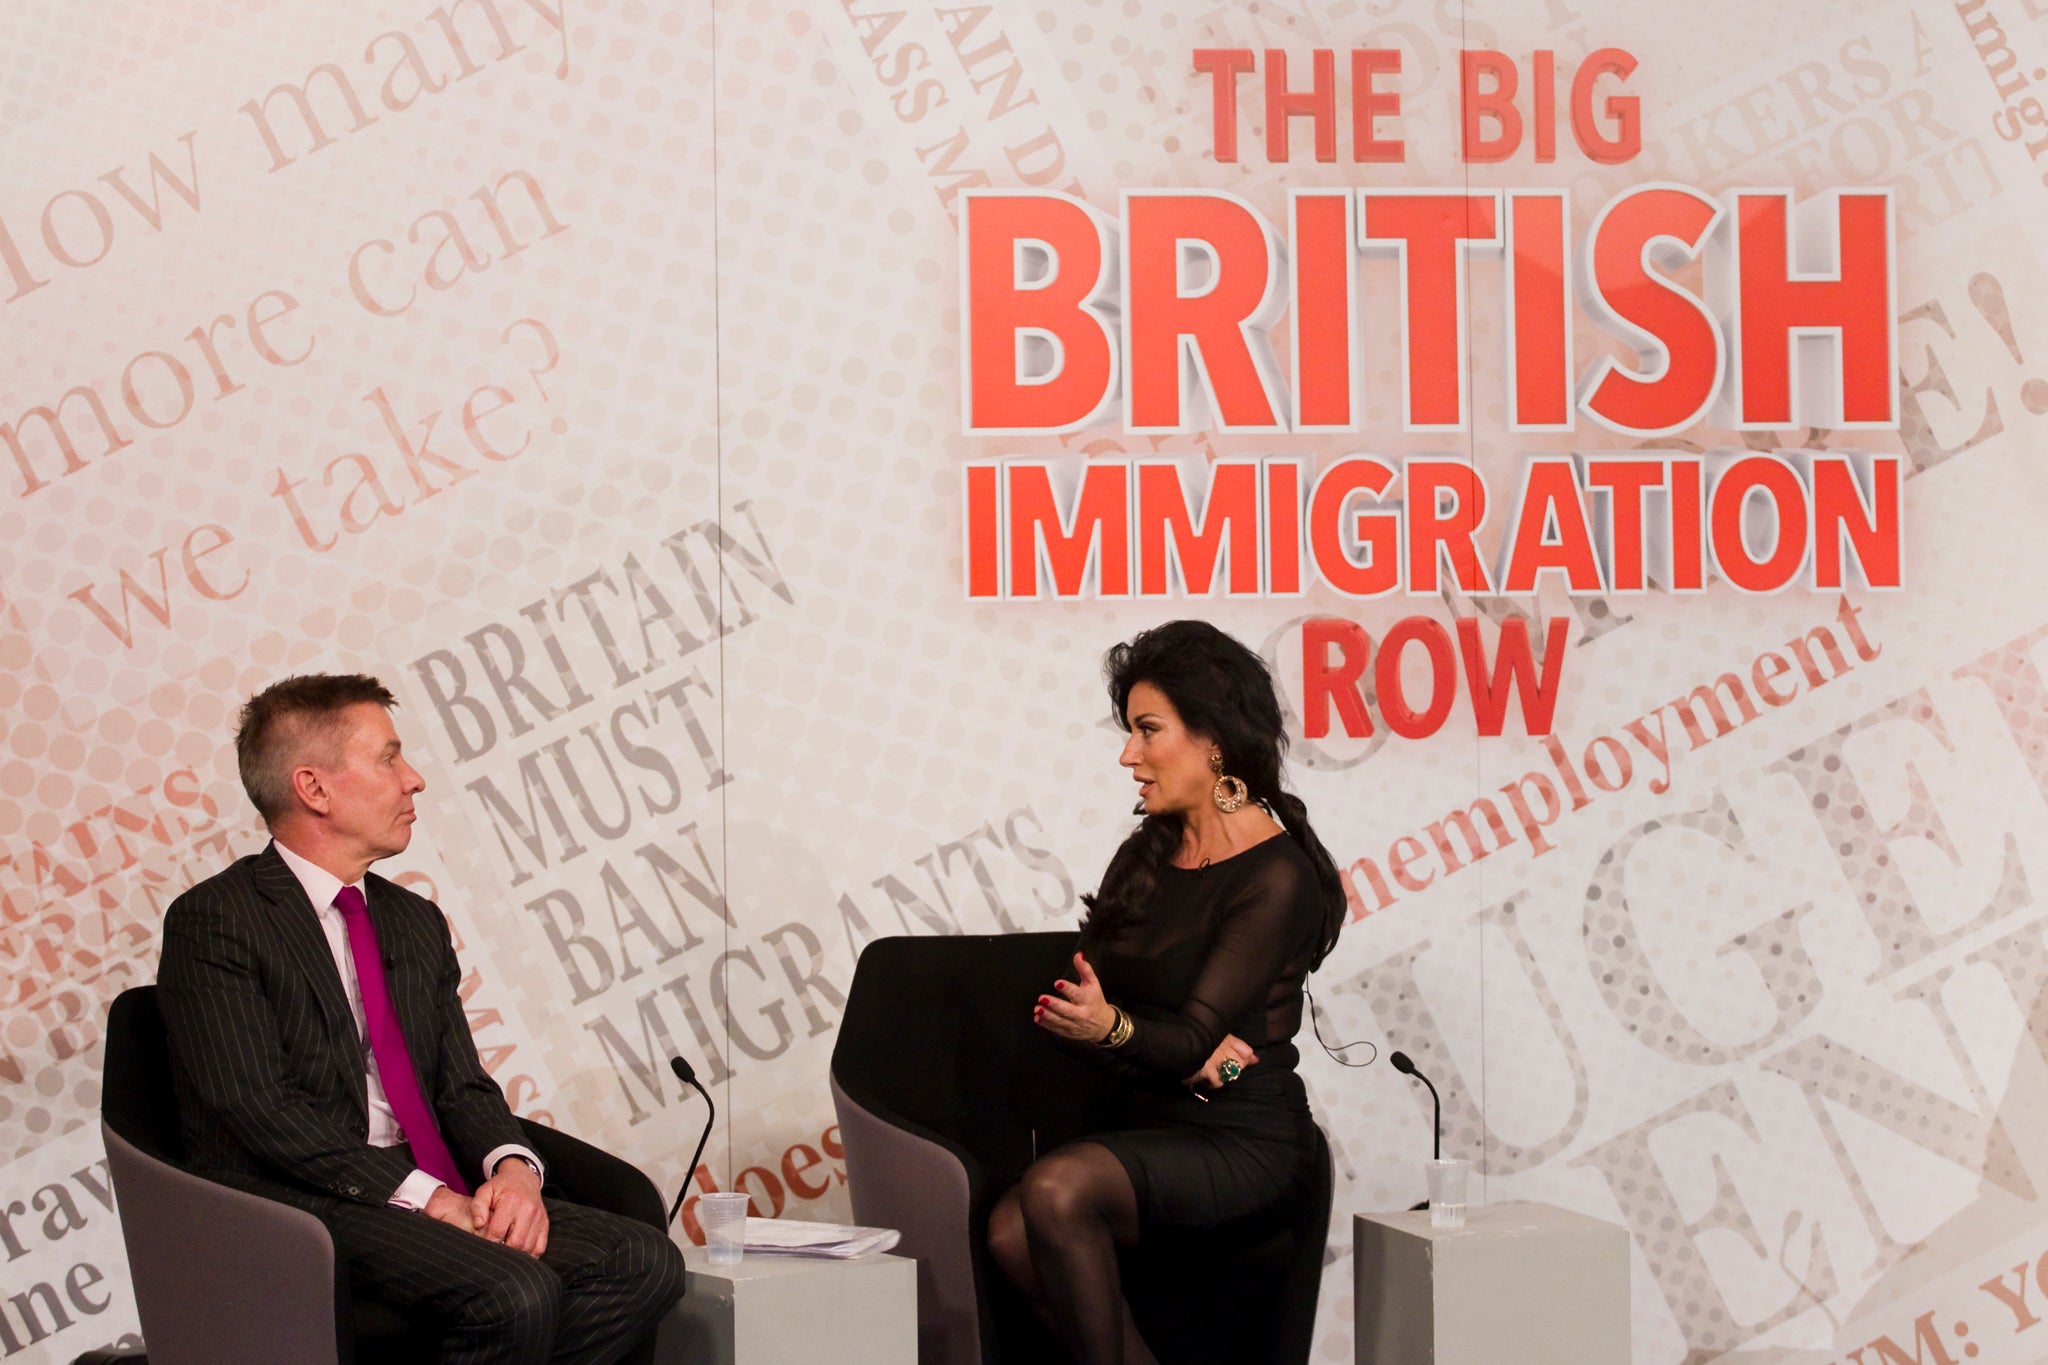 Nancy Dell’Olio appears on Channel 5's 'The Big British Immigration Row'